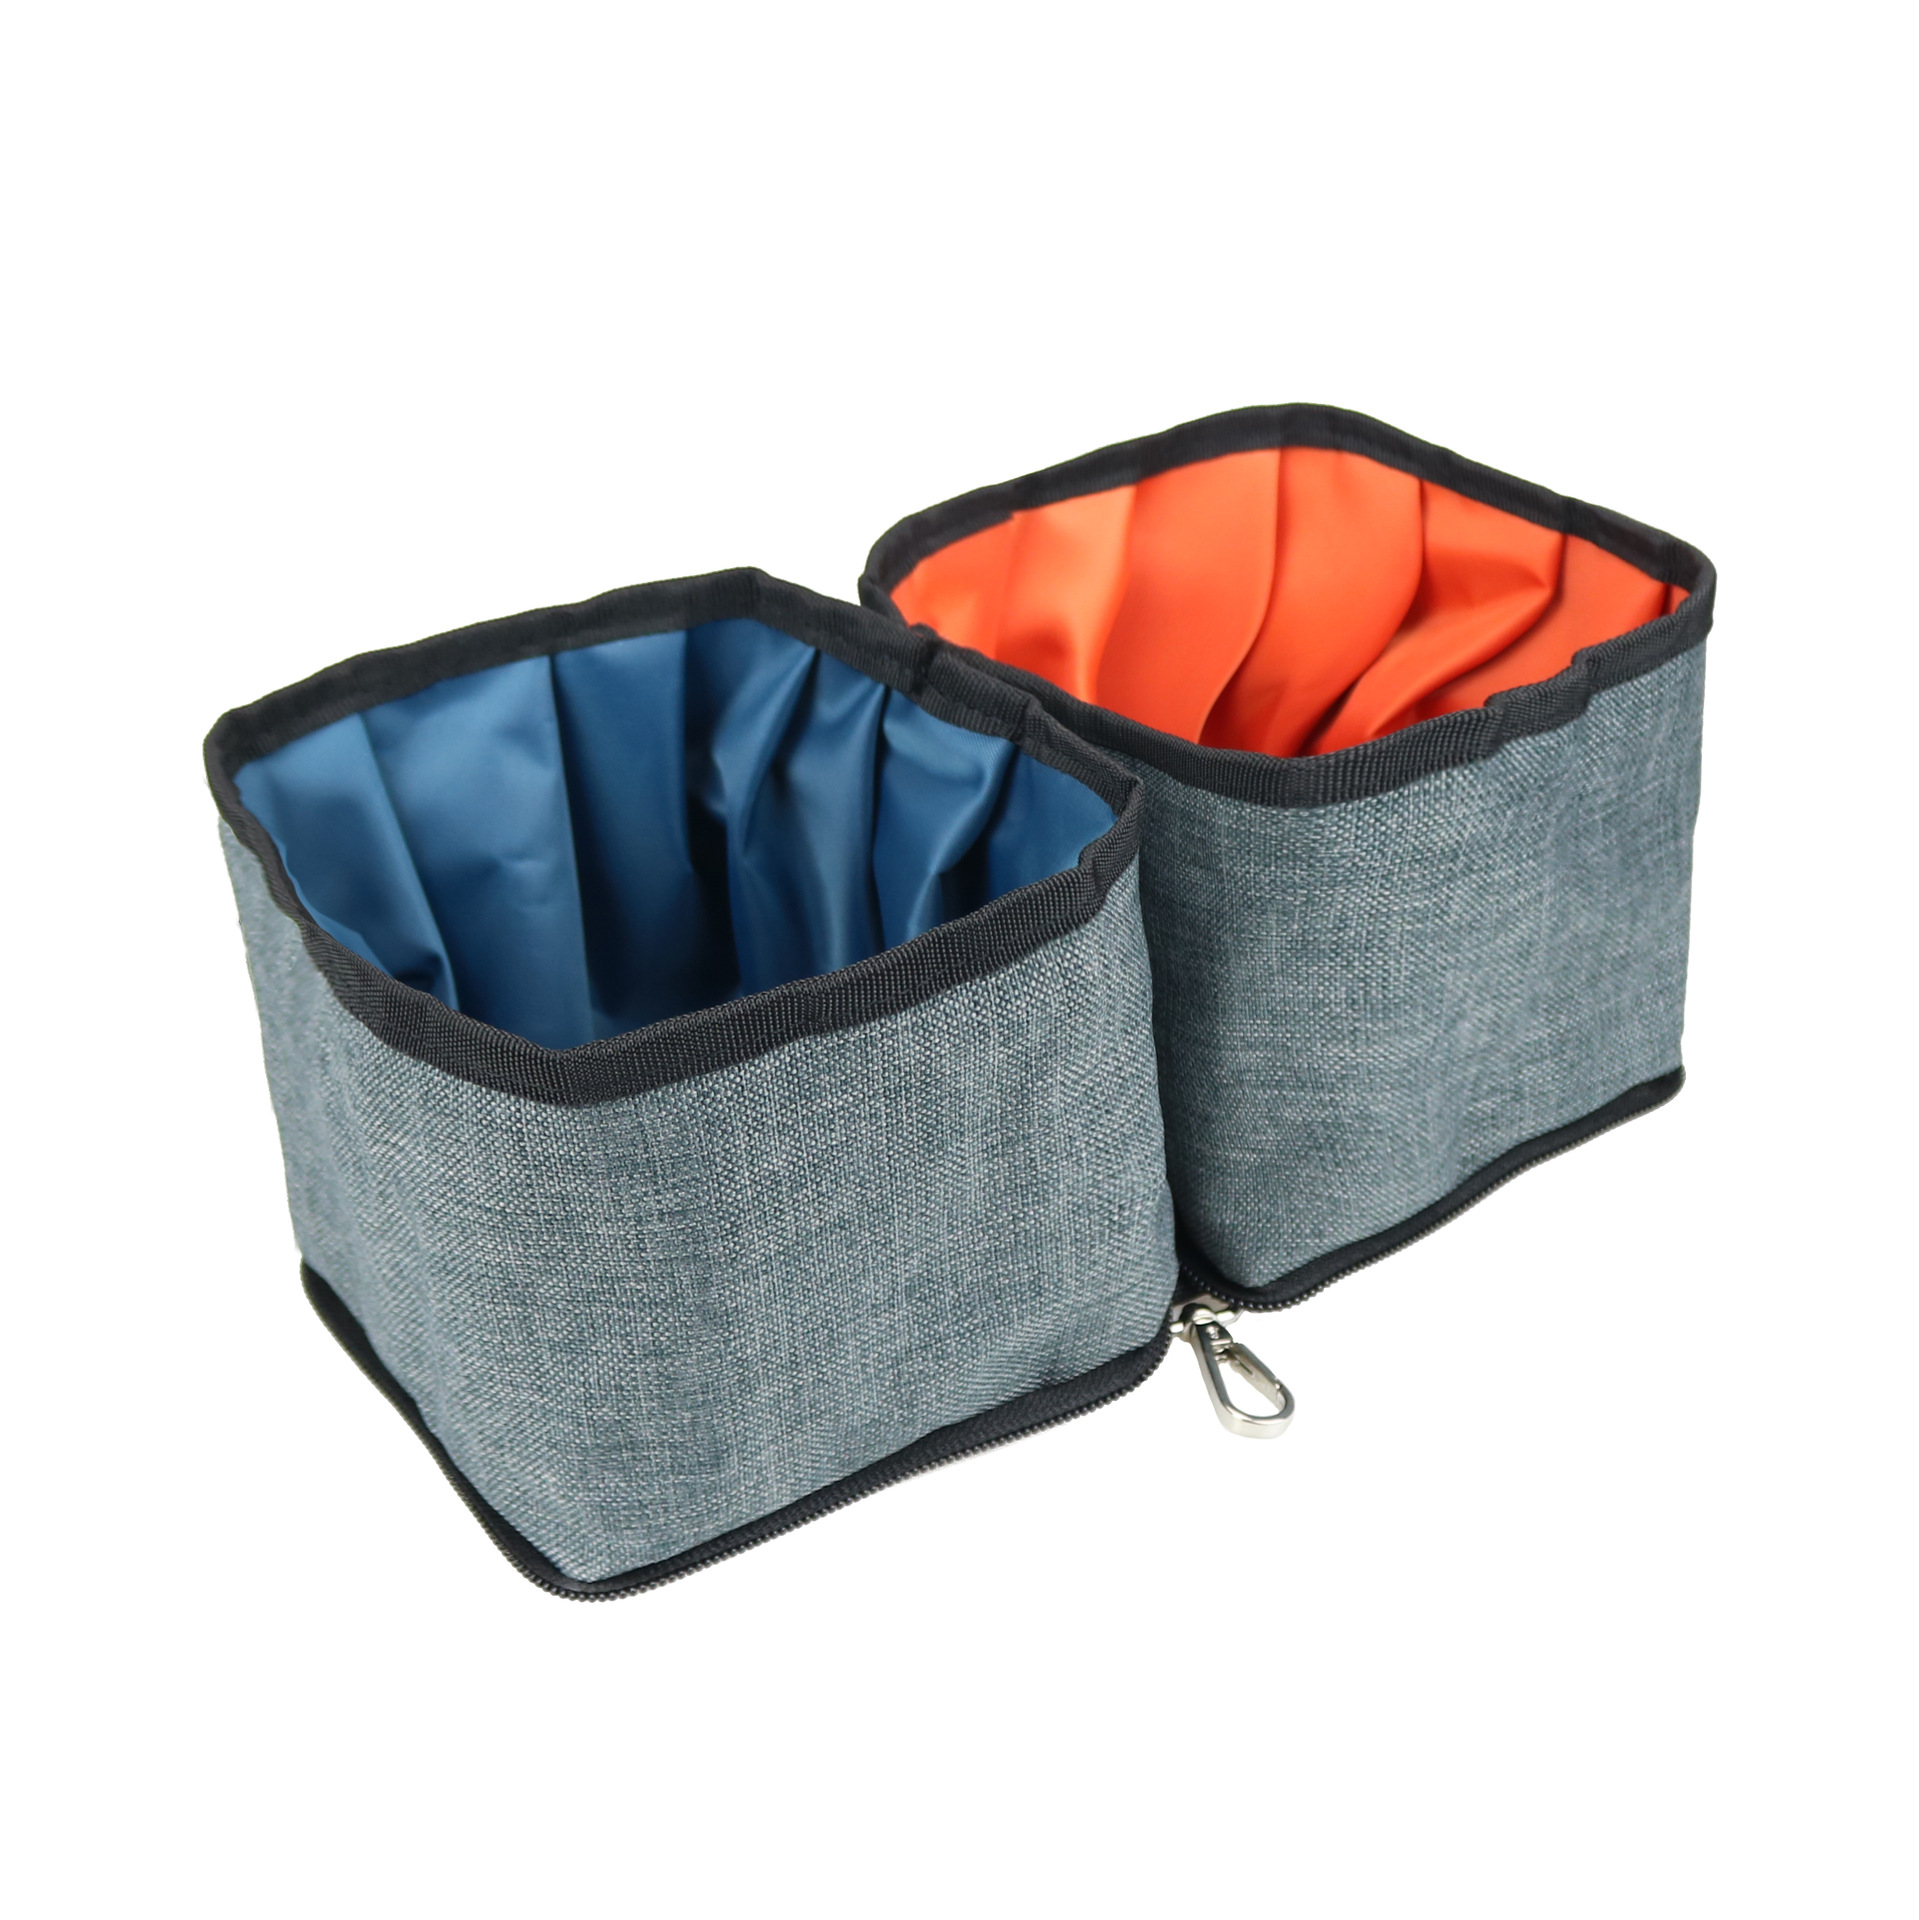 Collapsible Wet And Dry Feeding Dog Bowl Portable Pet Folding Bowl Outdoor Folding Cat And Dog Pet Bowl